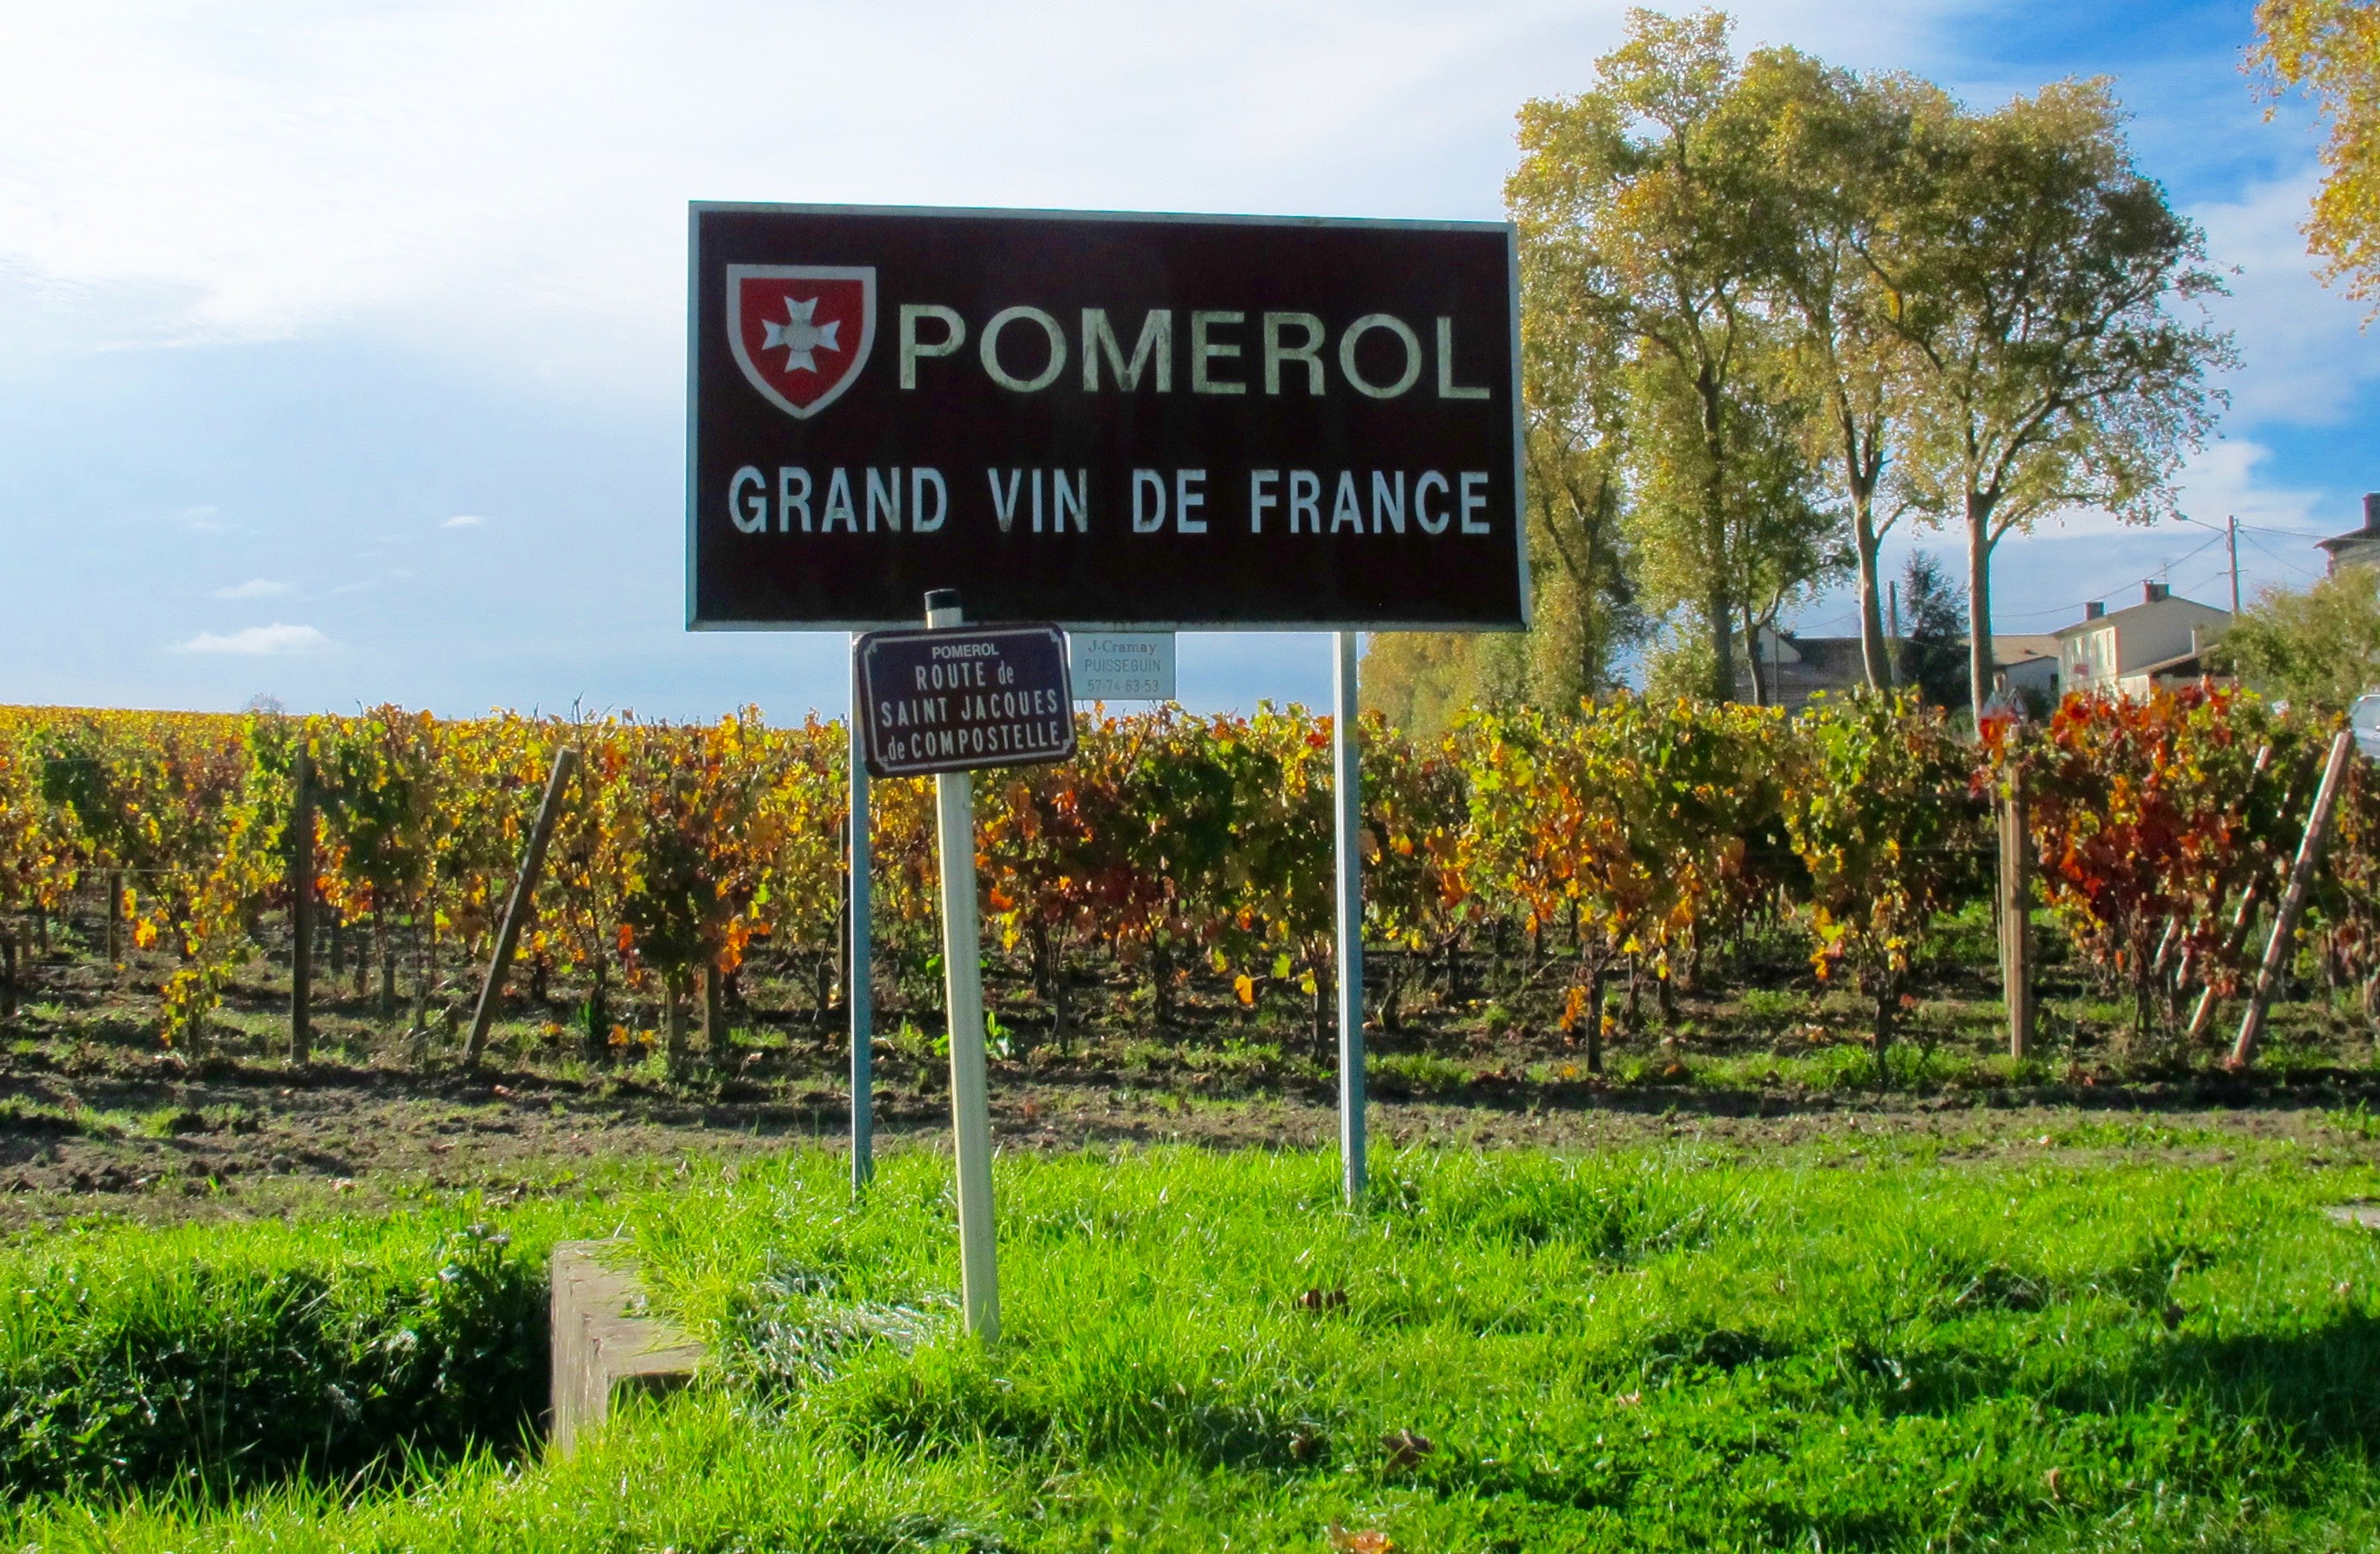 Pomerol is all about wine. Photo by Marla Norman.